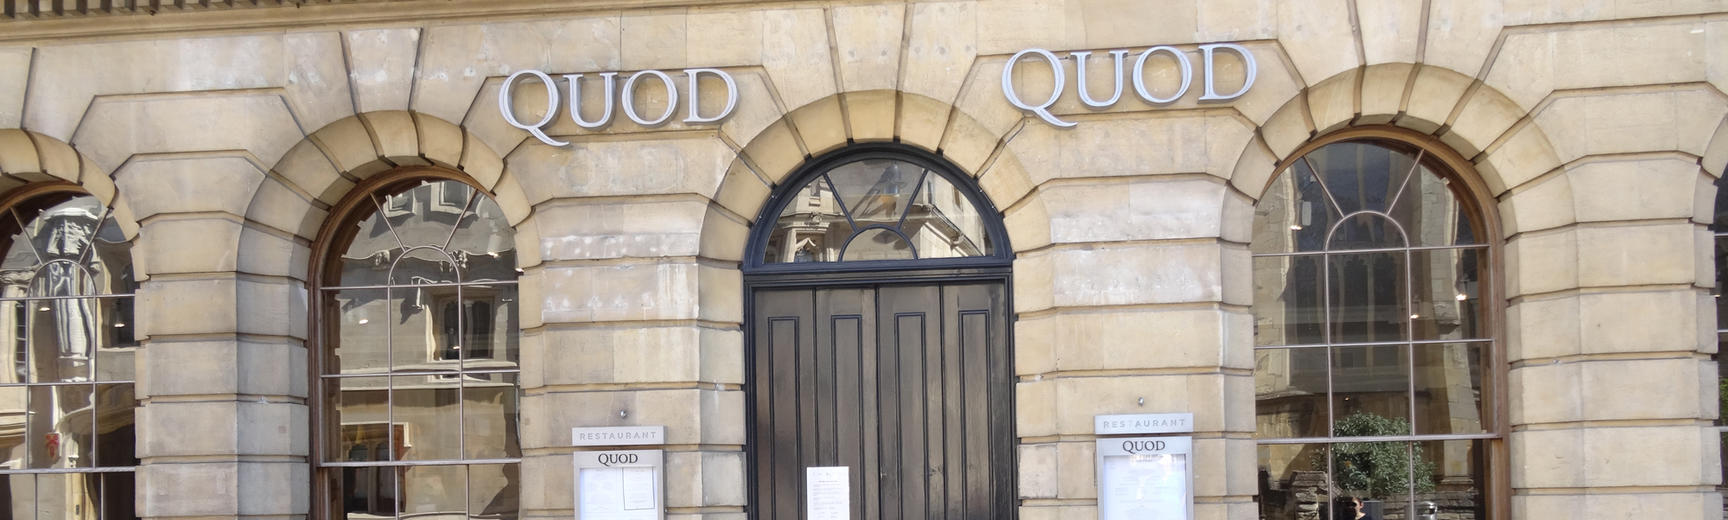 The exterior of the Quod restaurant in Oxford